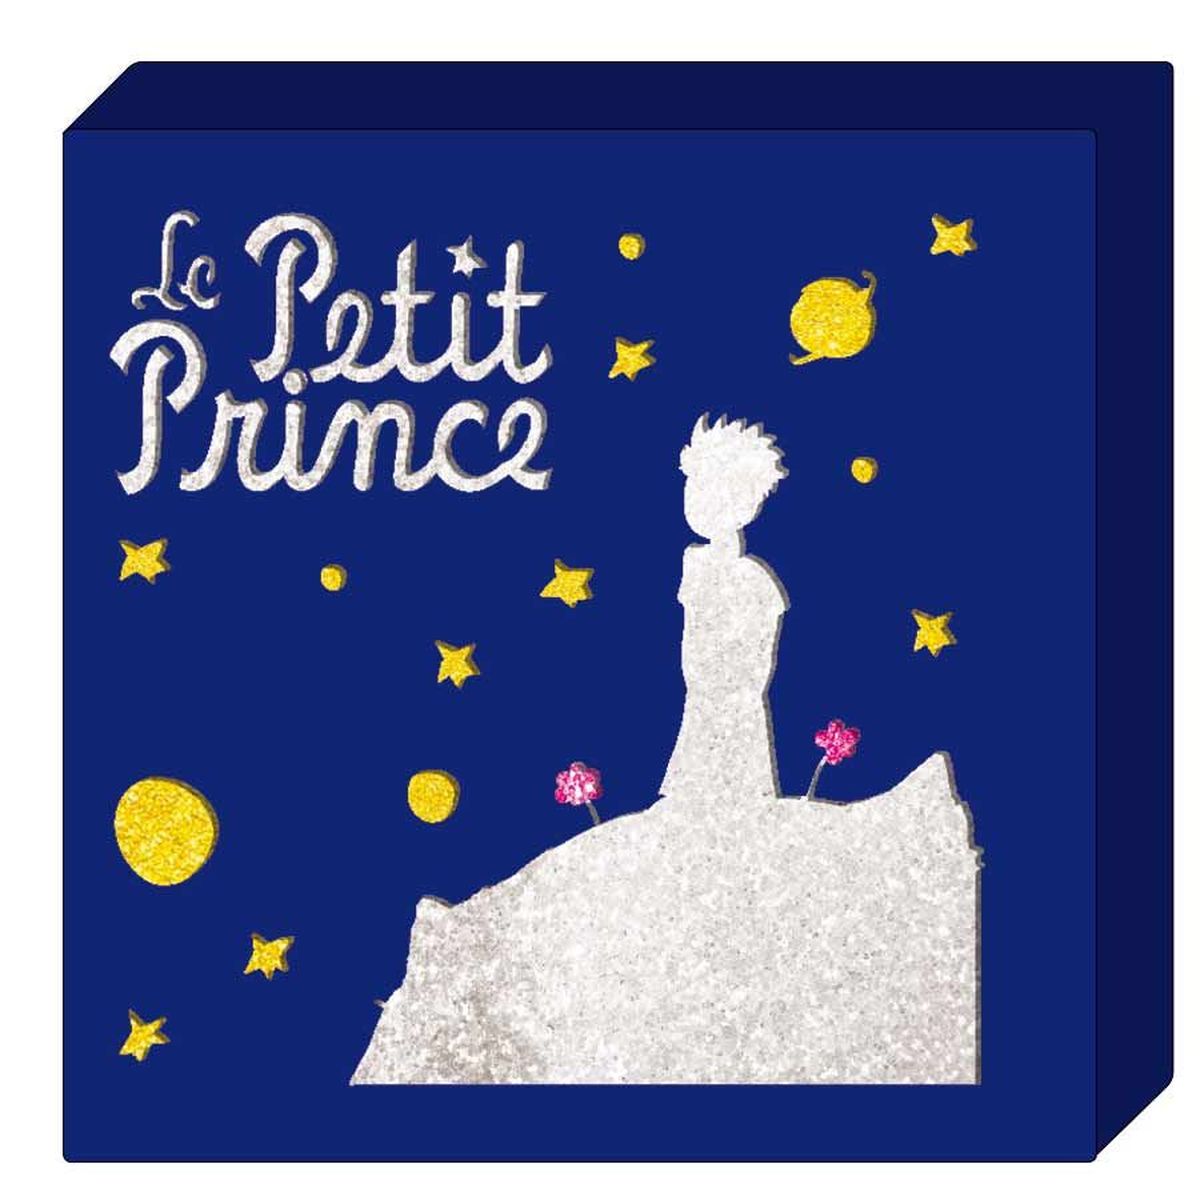 Bright Wooden Frame The Little Prince of St Exupery